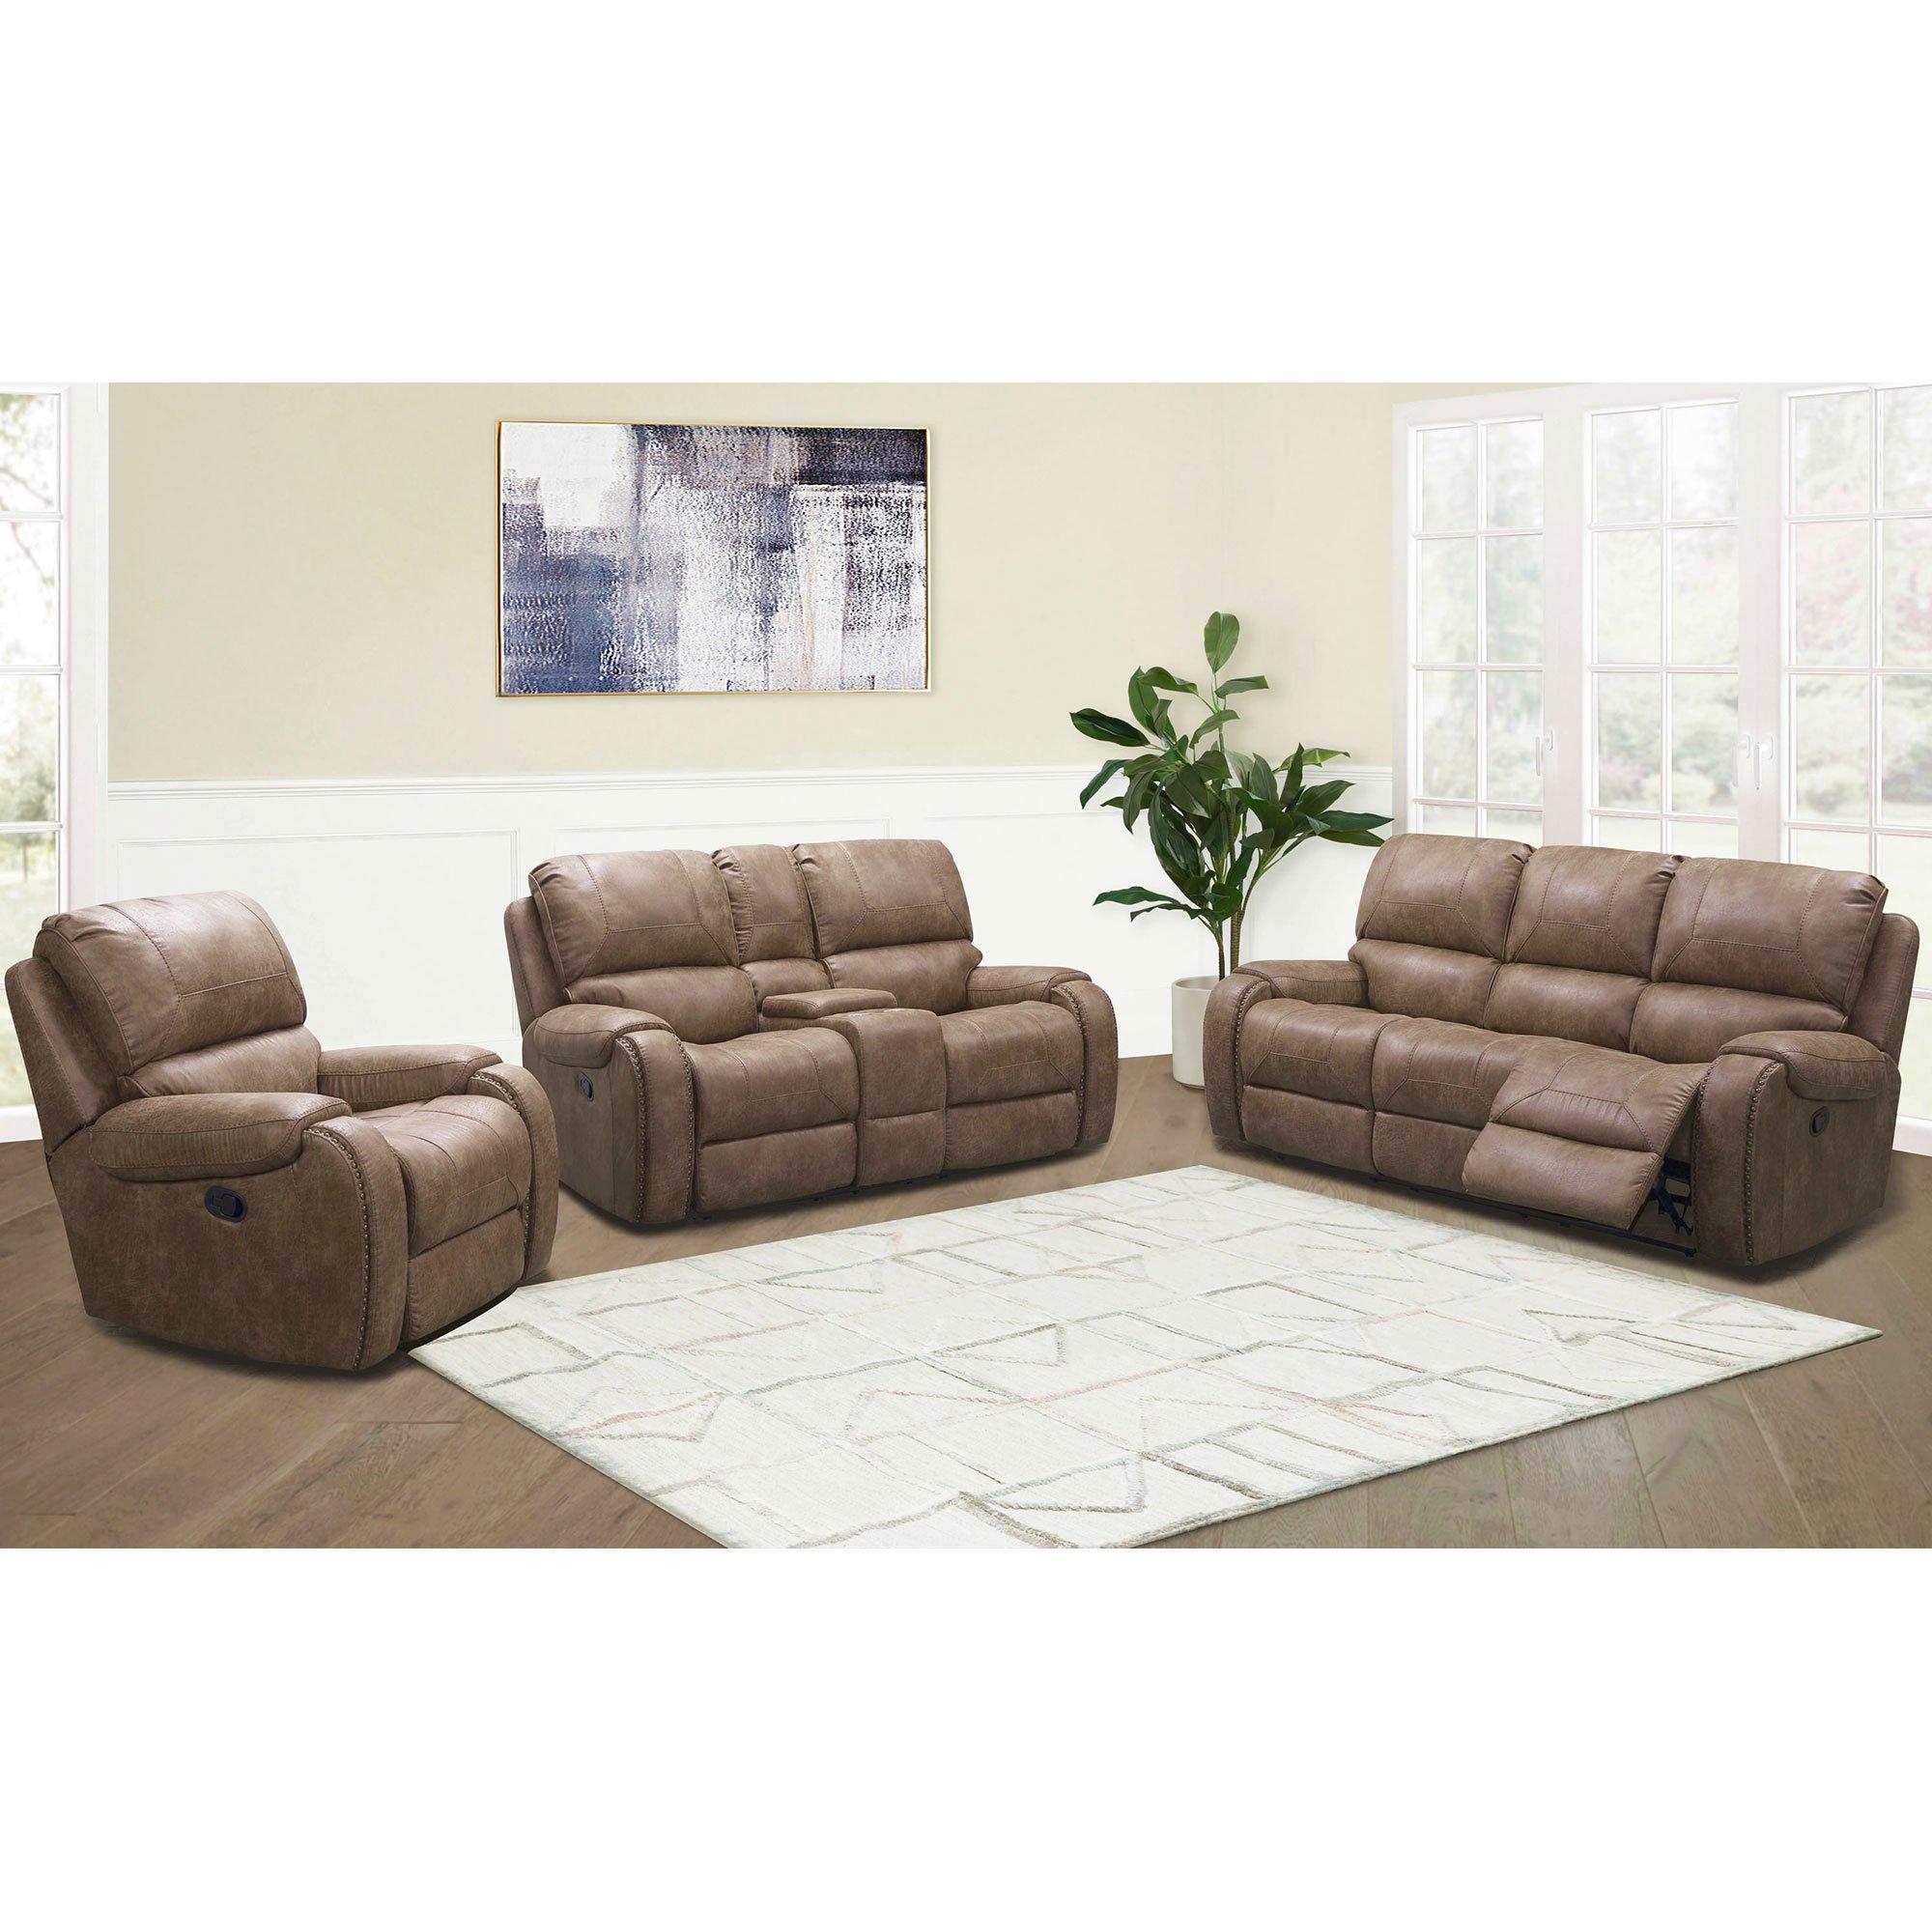 Rent to Own Abbyson Living 3-Piece Houston Recliner Sofa, Loveseat &  Recliner - Camel at Aaron's today!